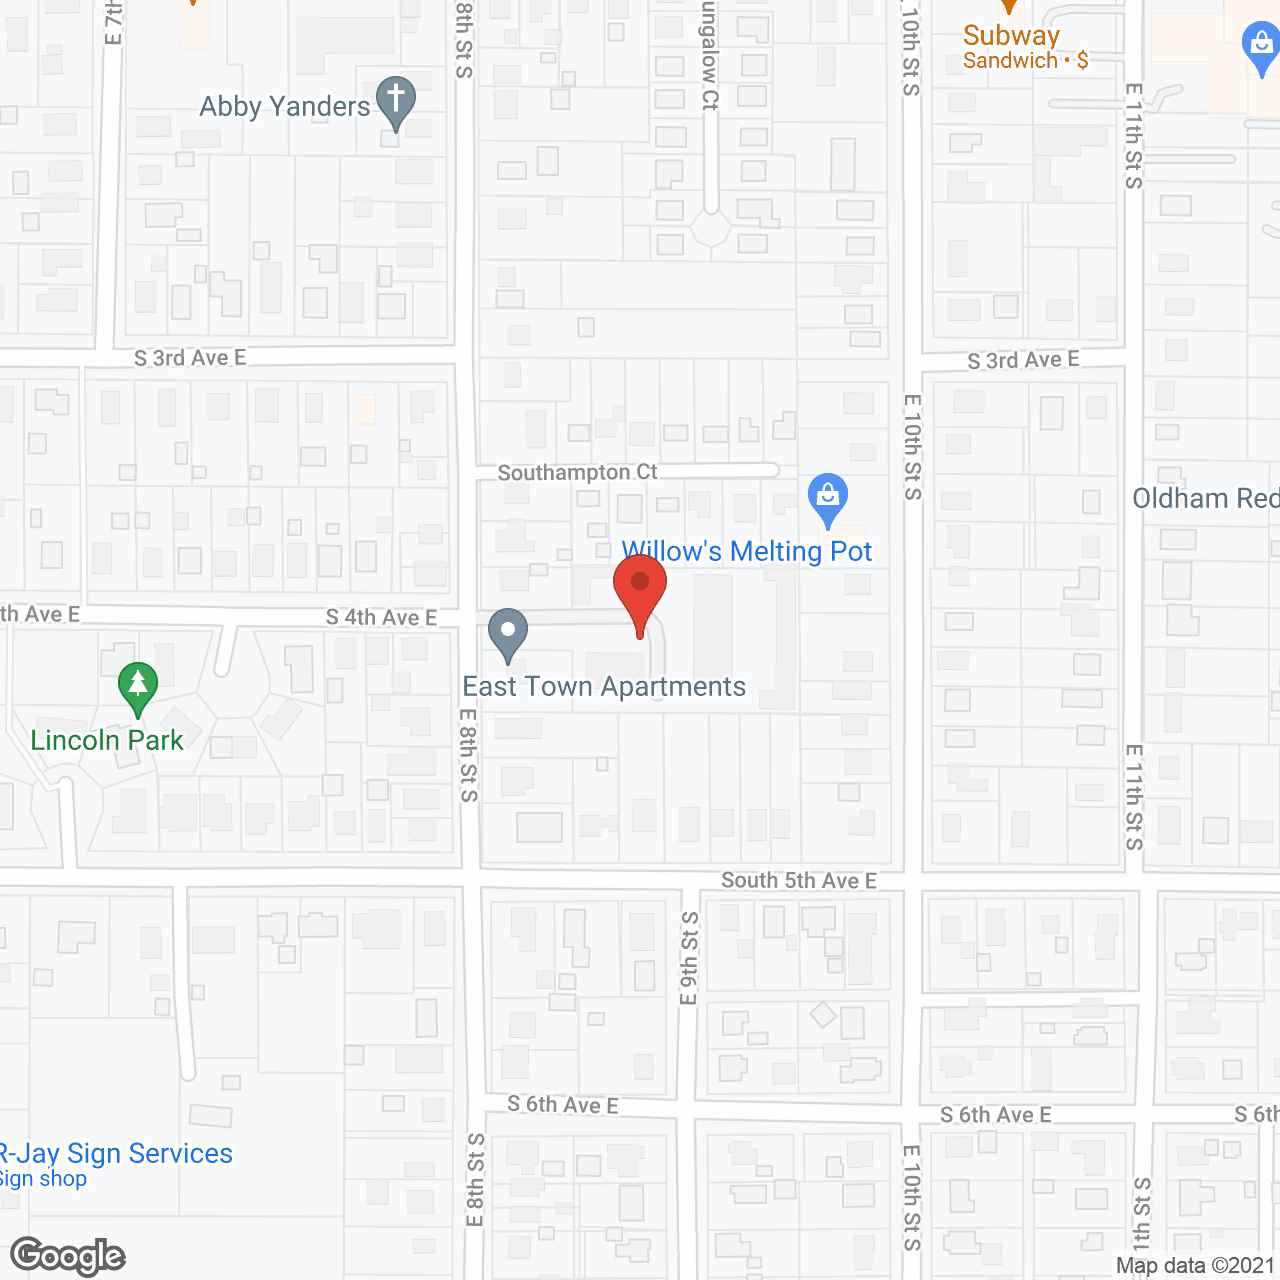 East Town Apartments in google map